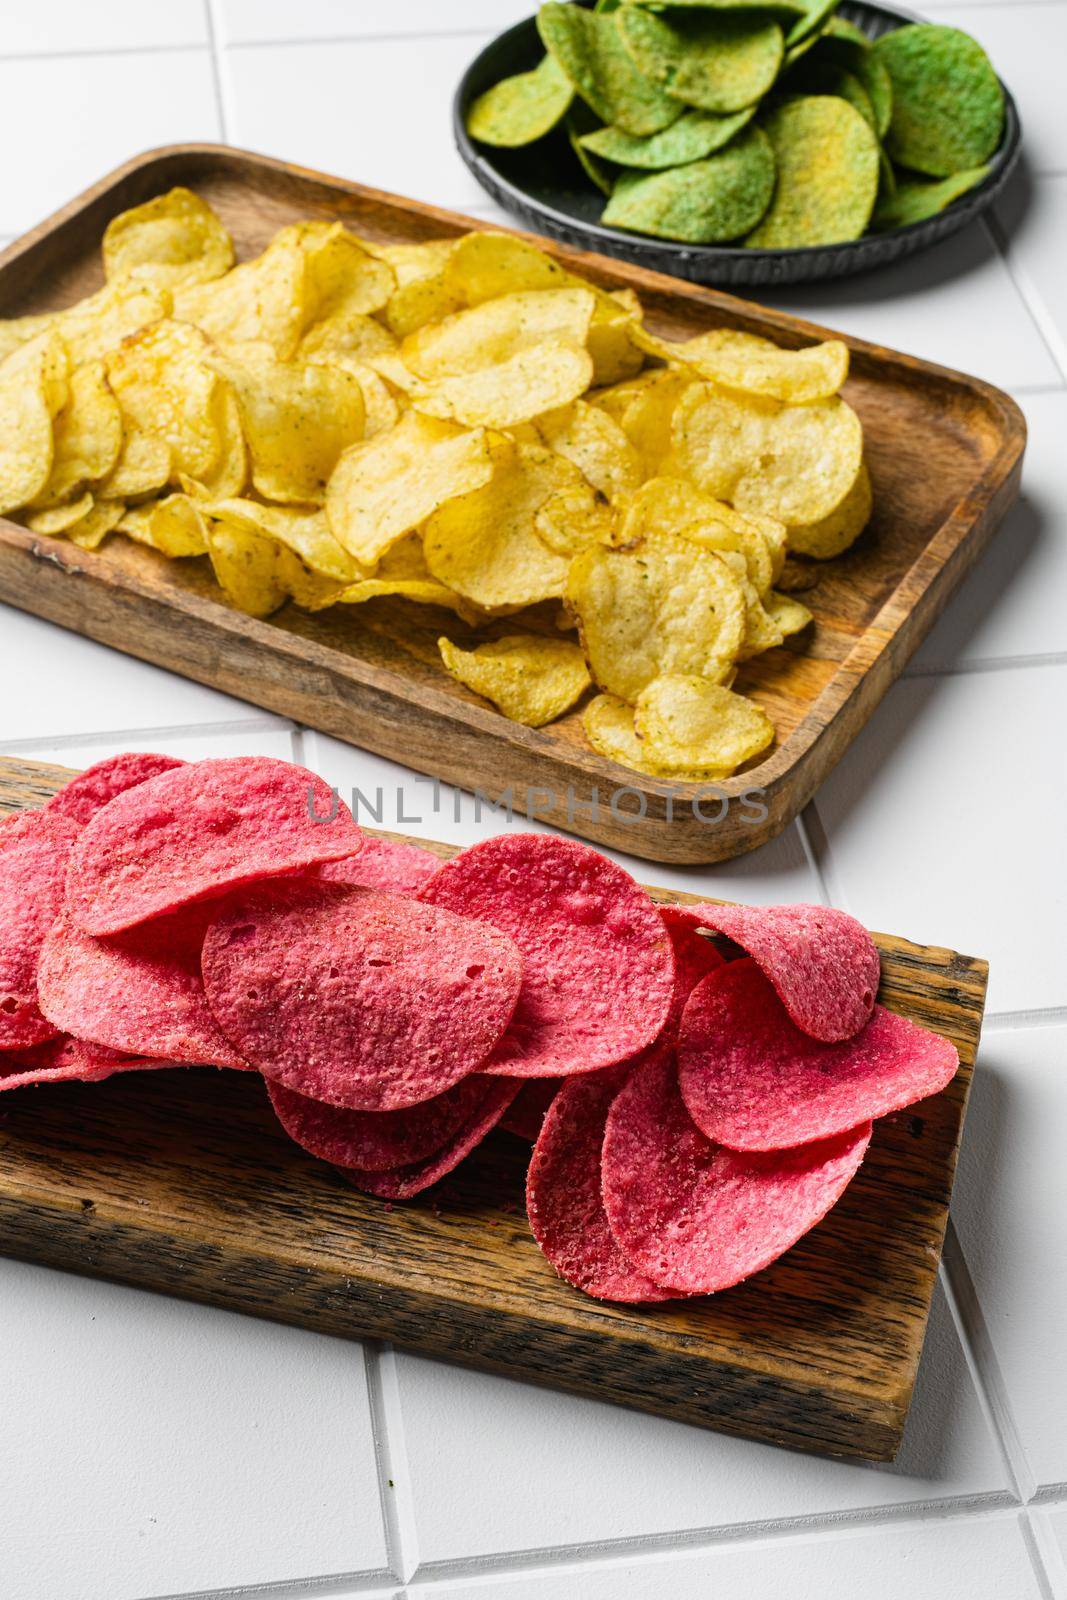 Potato chips pink colored, on white ceramic squared tile table background